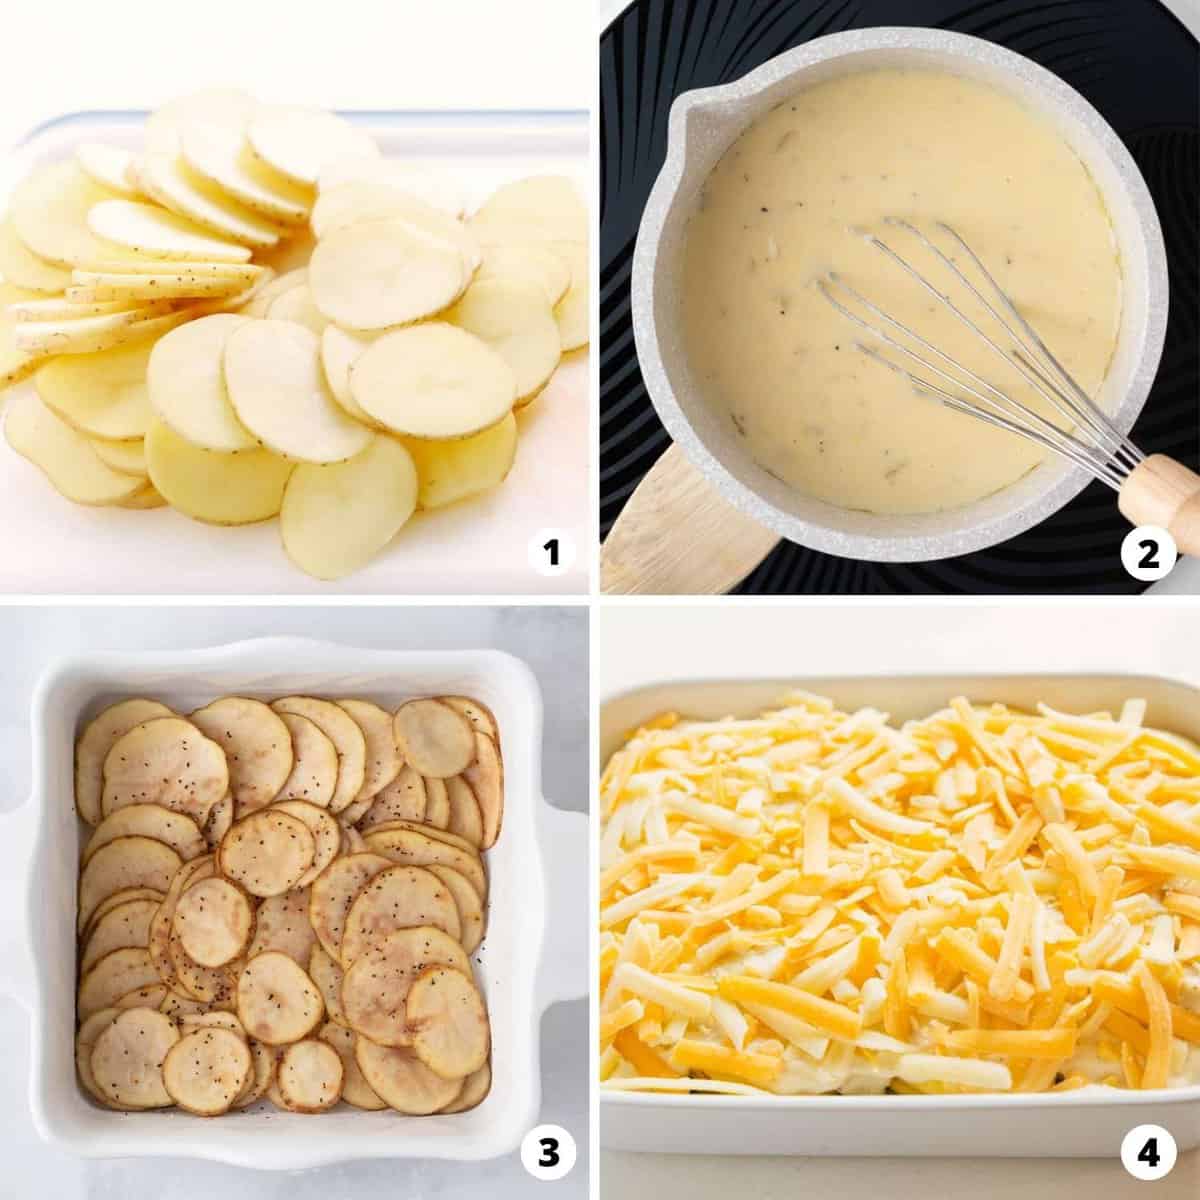 Showing how to make cheesy scalloped potatoes in a 4 step collage.